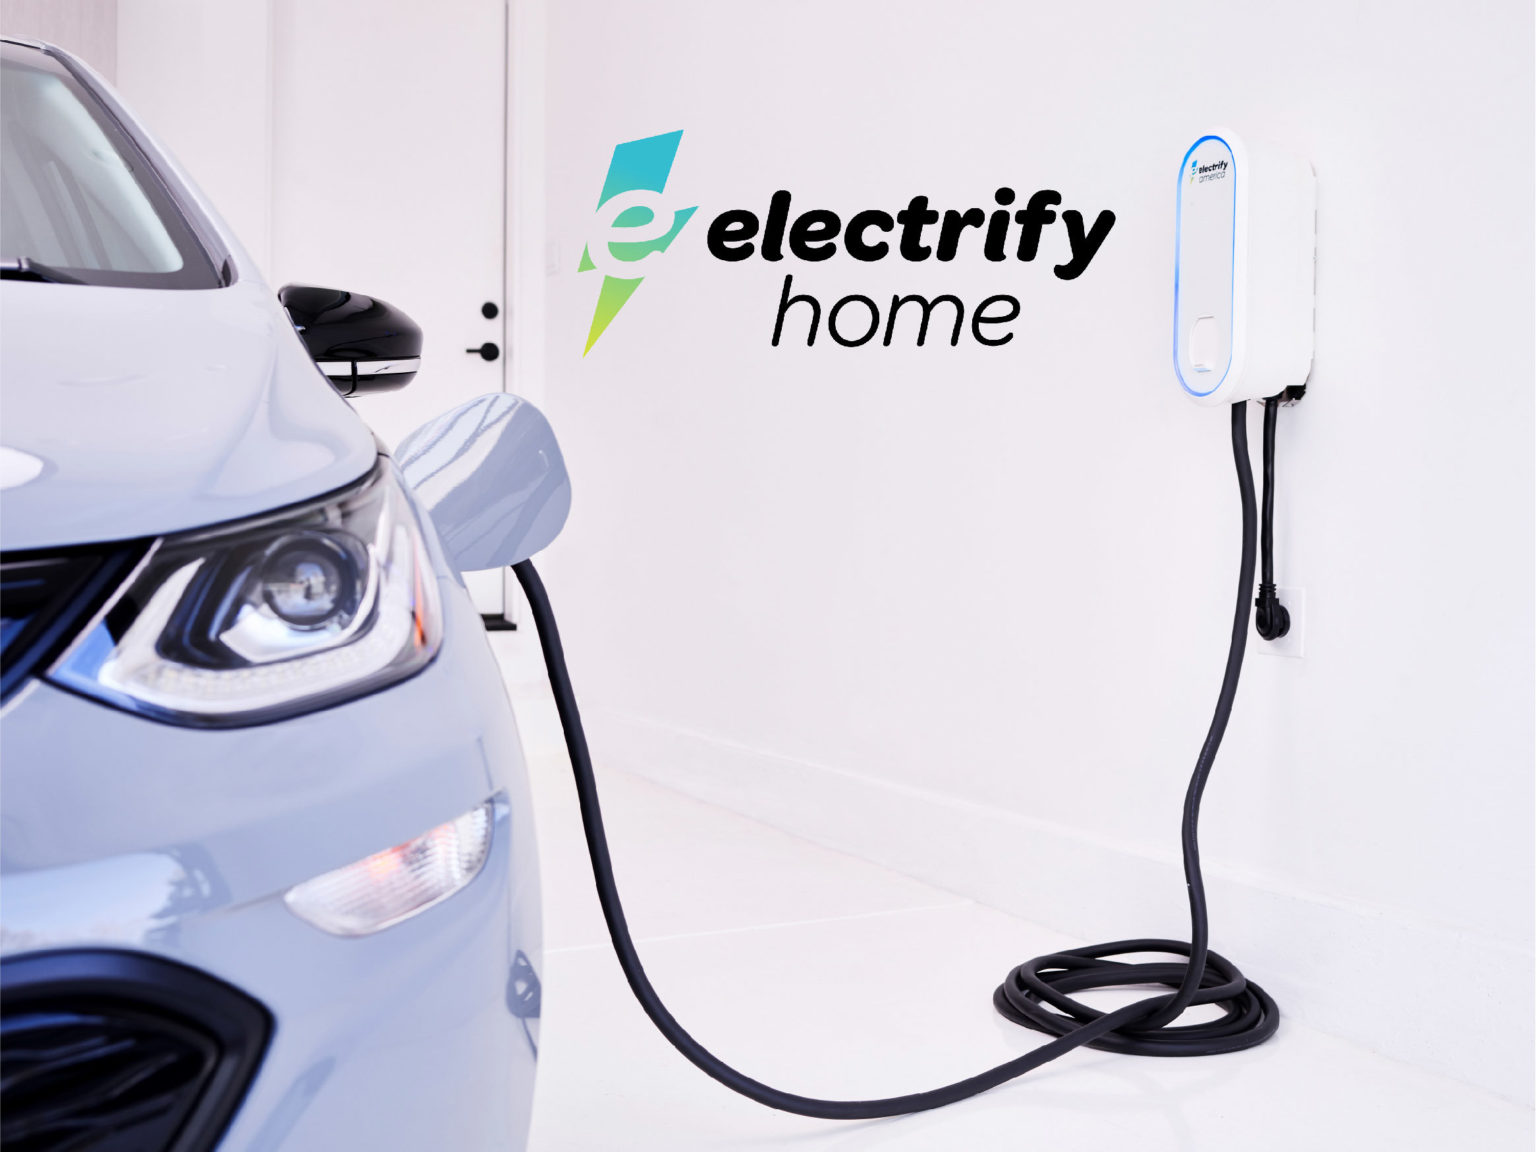 Electrify America is expanding its business into the home.